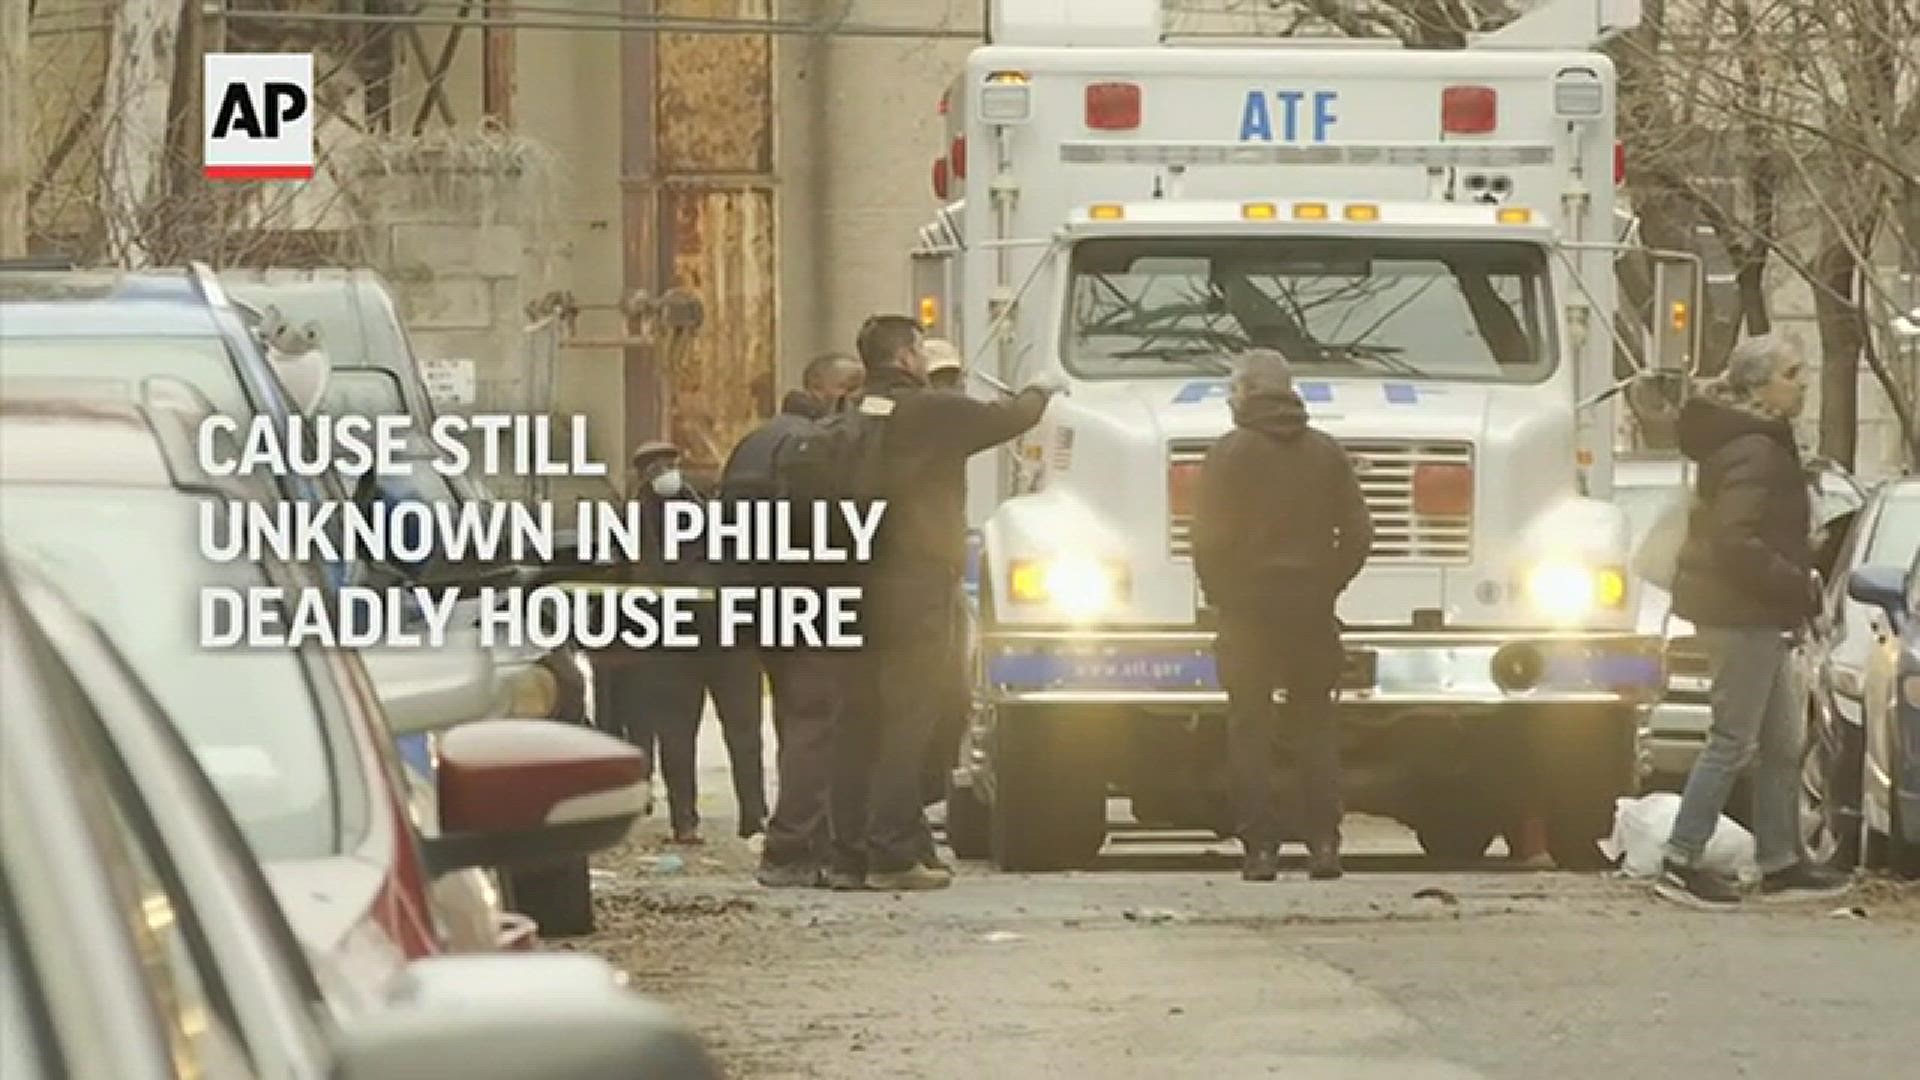 City and federal investigators are working to determine the cause of a blaze that killed 12 people in a Philadelphia rowhome.